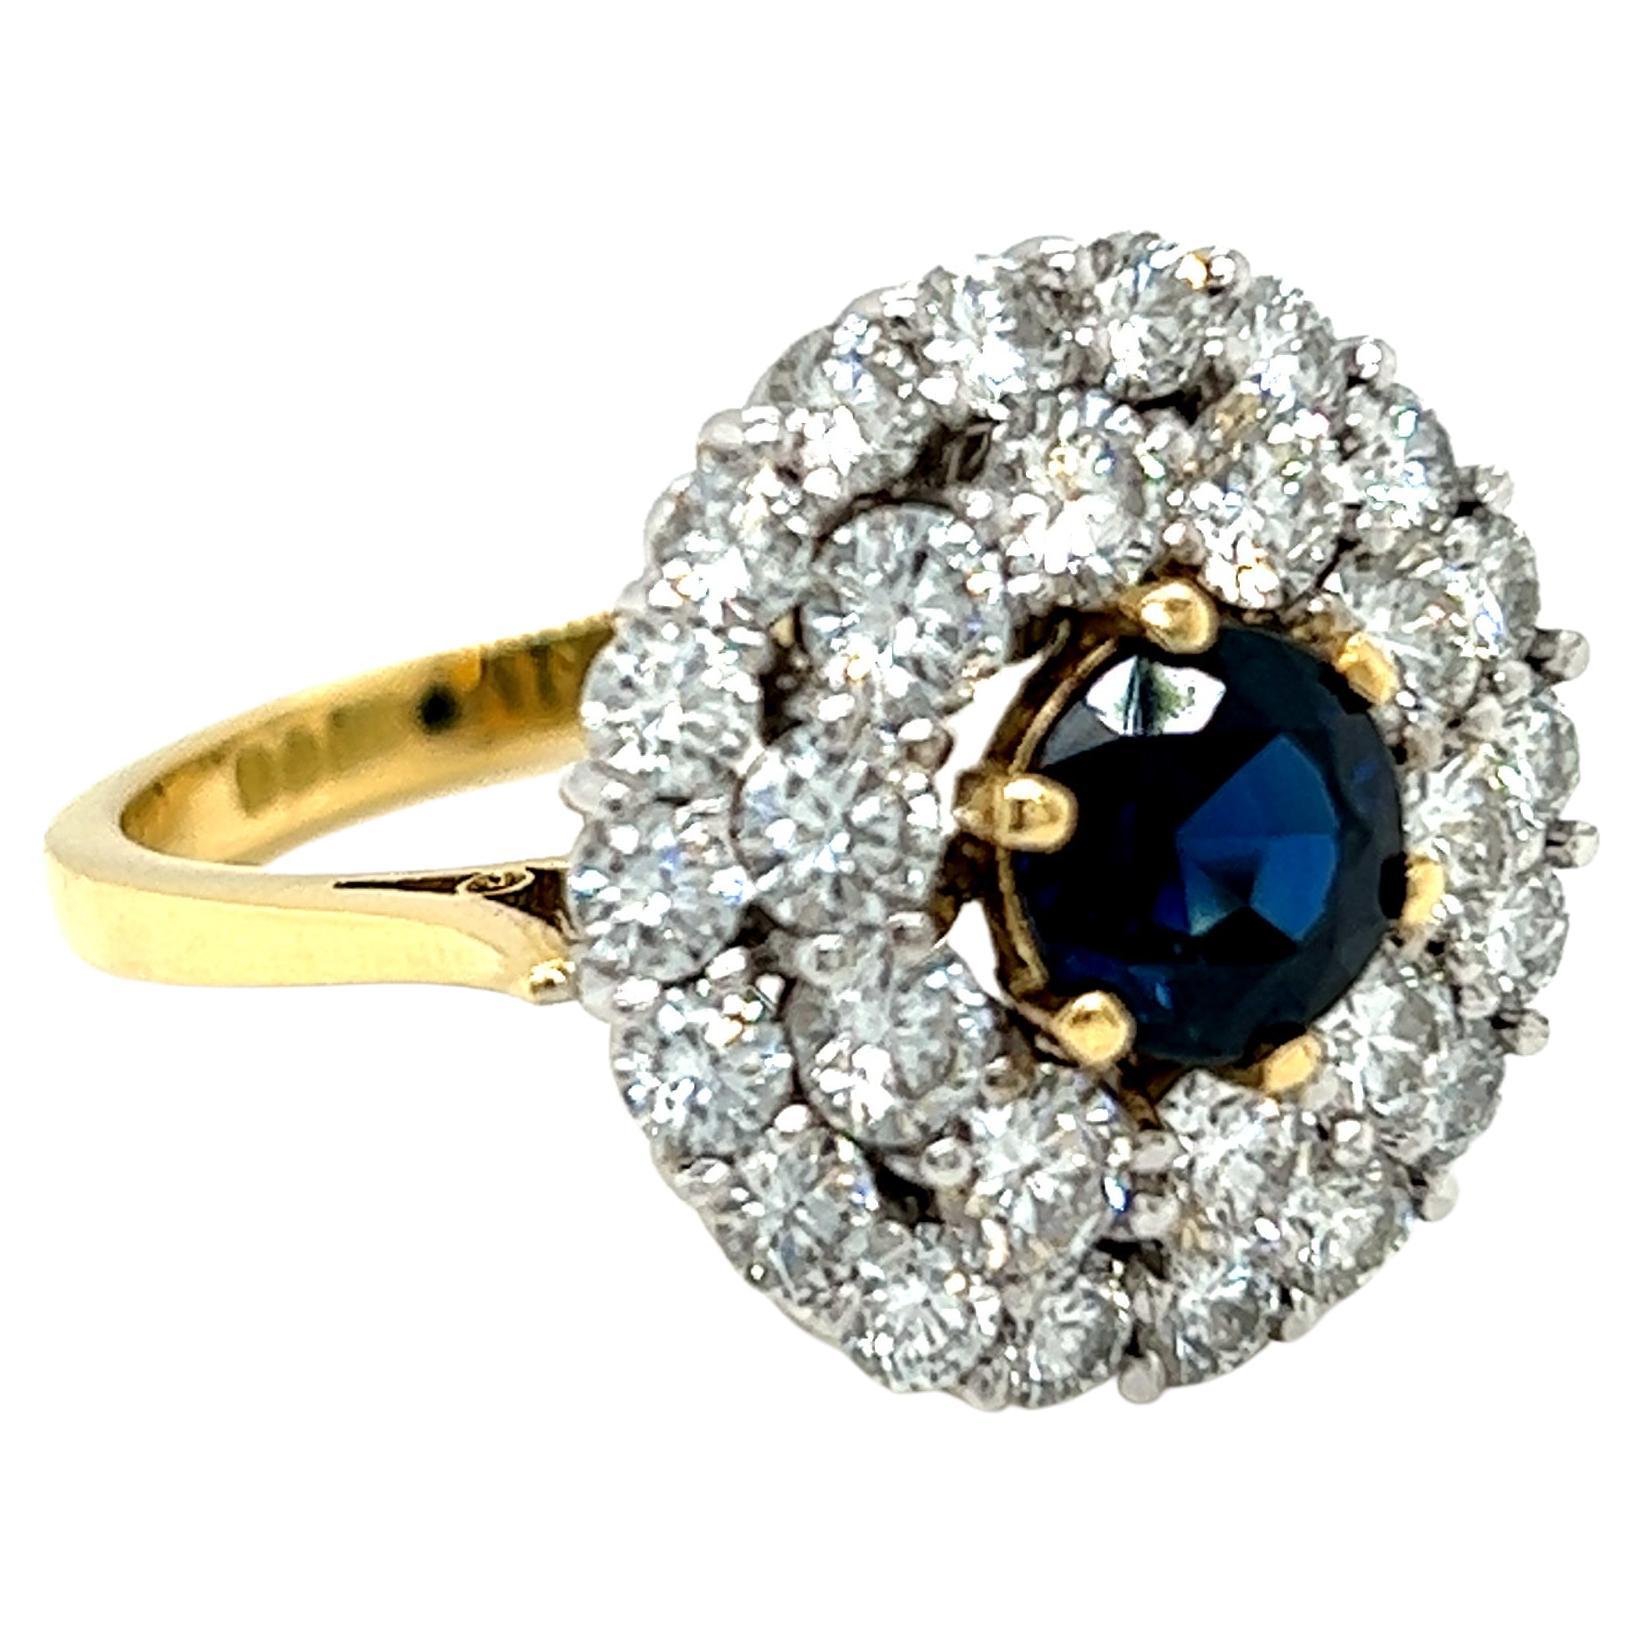 Round Brilliant Blue Sapphire and Diamond Ring in 18K Yellow and White Gold